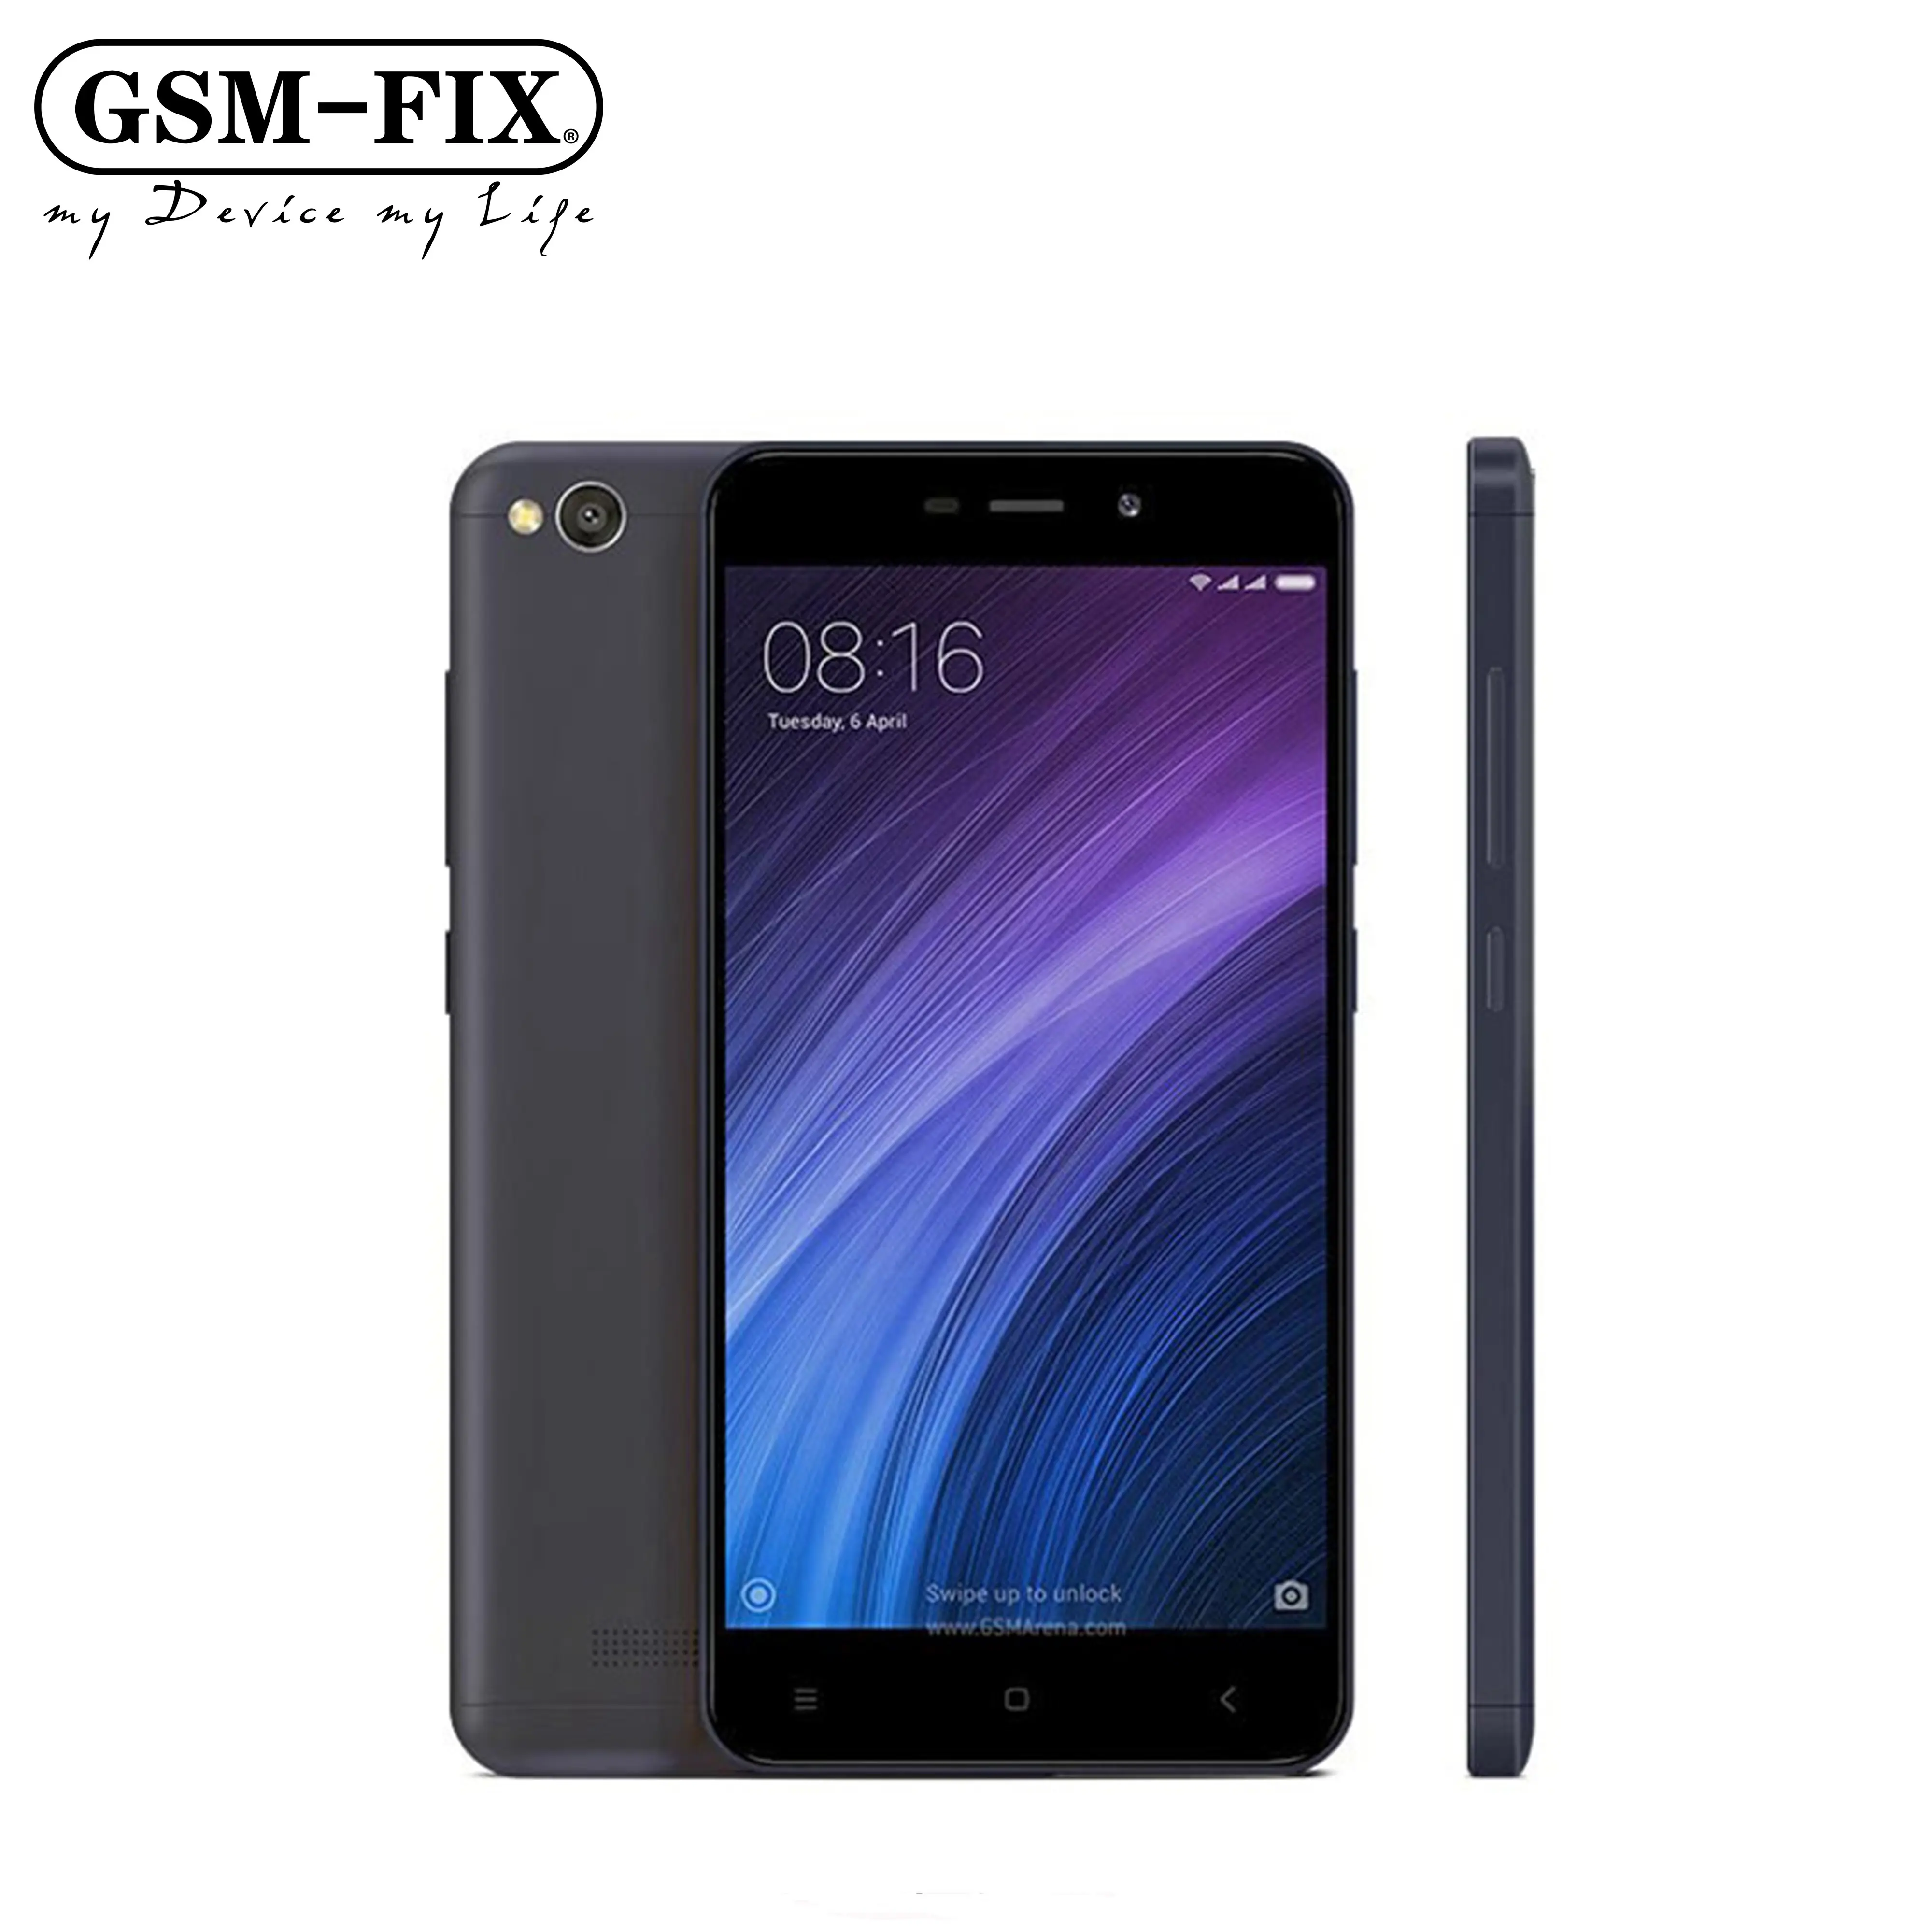 GSM-FIX Wholesale Original For Xiaomi Redmi 4A 2+16GB Android Smart Phone 4G Lte Phones For Sale